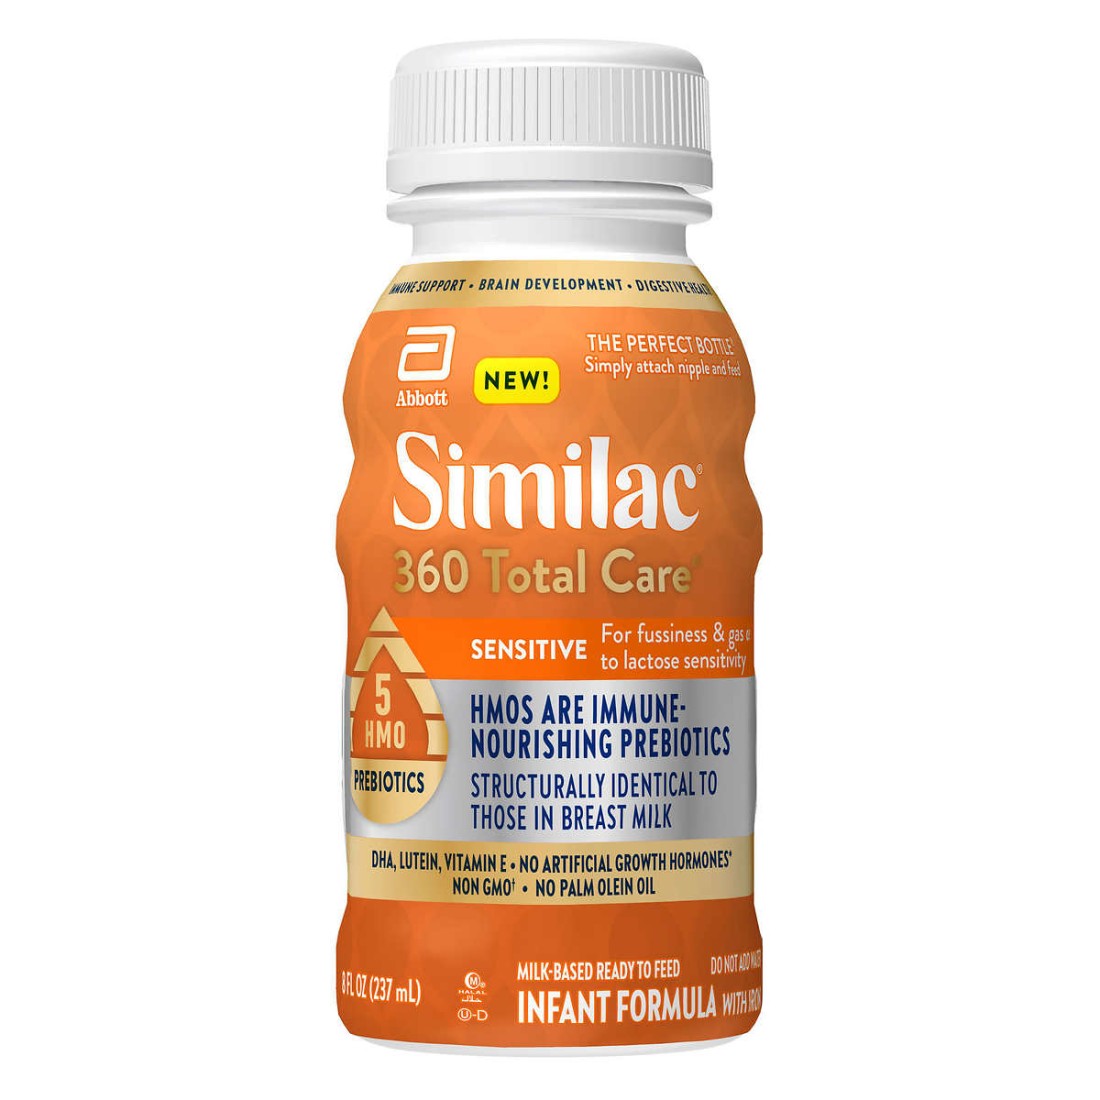 Similac Sensitive Ready-to-Feed: A Gentle Formula for Delicate Tummies